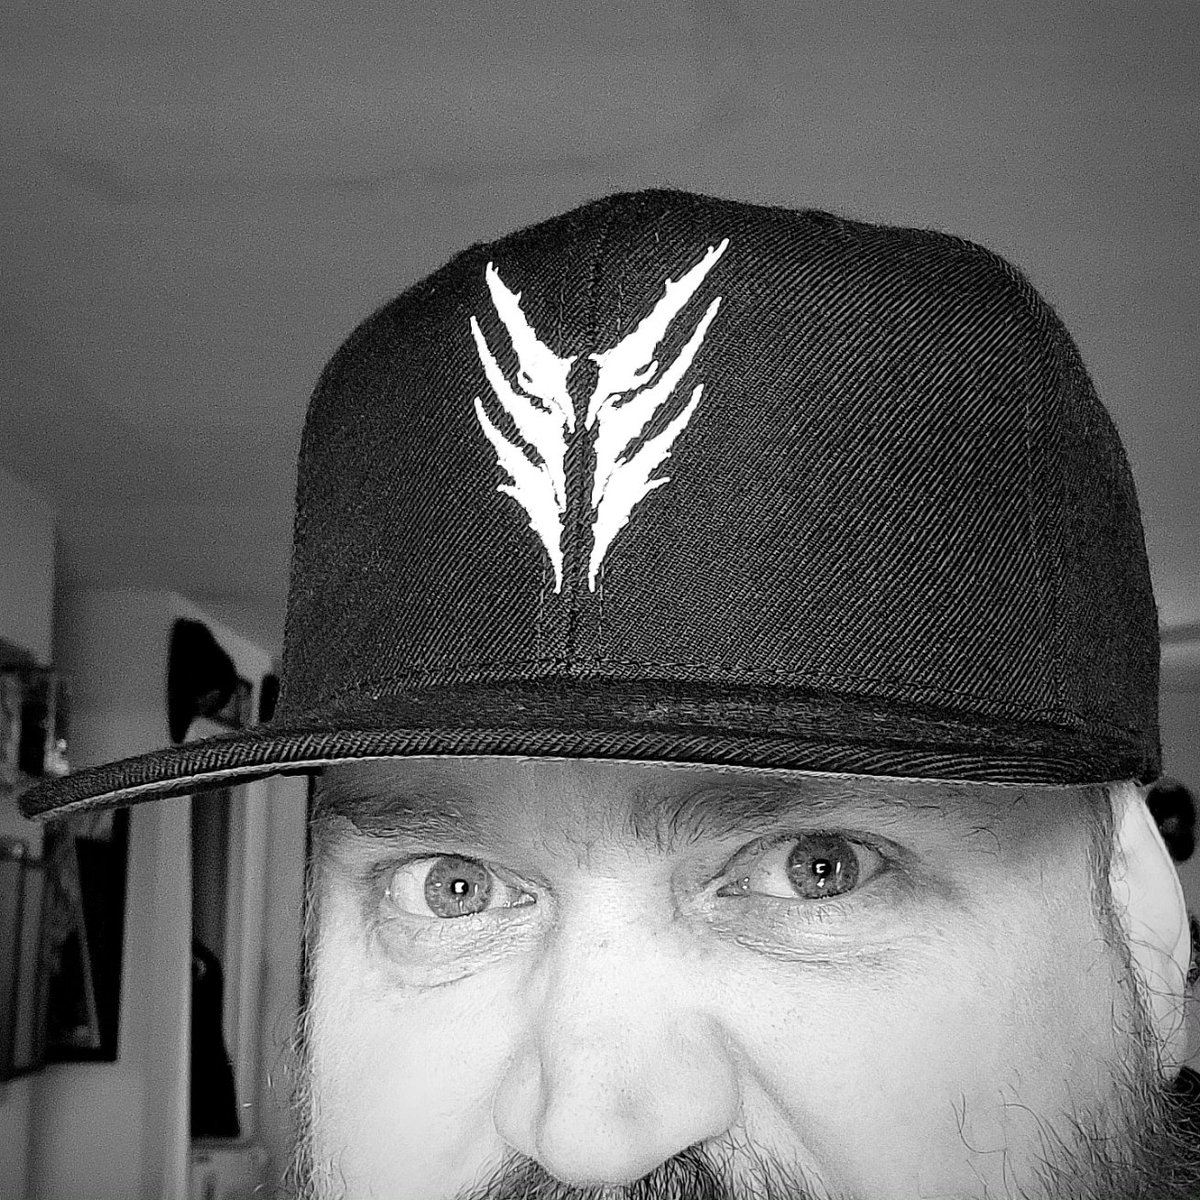 ANOTHER Incredible cap to add to the collection!!

@orbitculture #capaddict #merch #swag #ootd #beardsofinstagram #metalaf